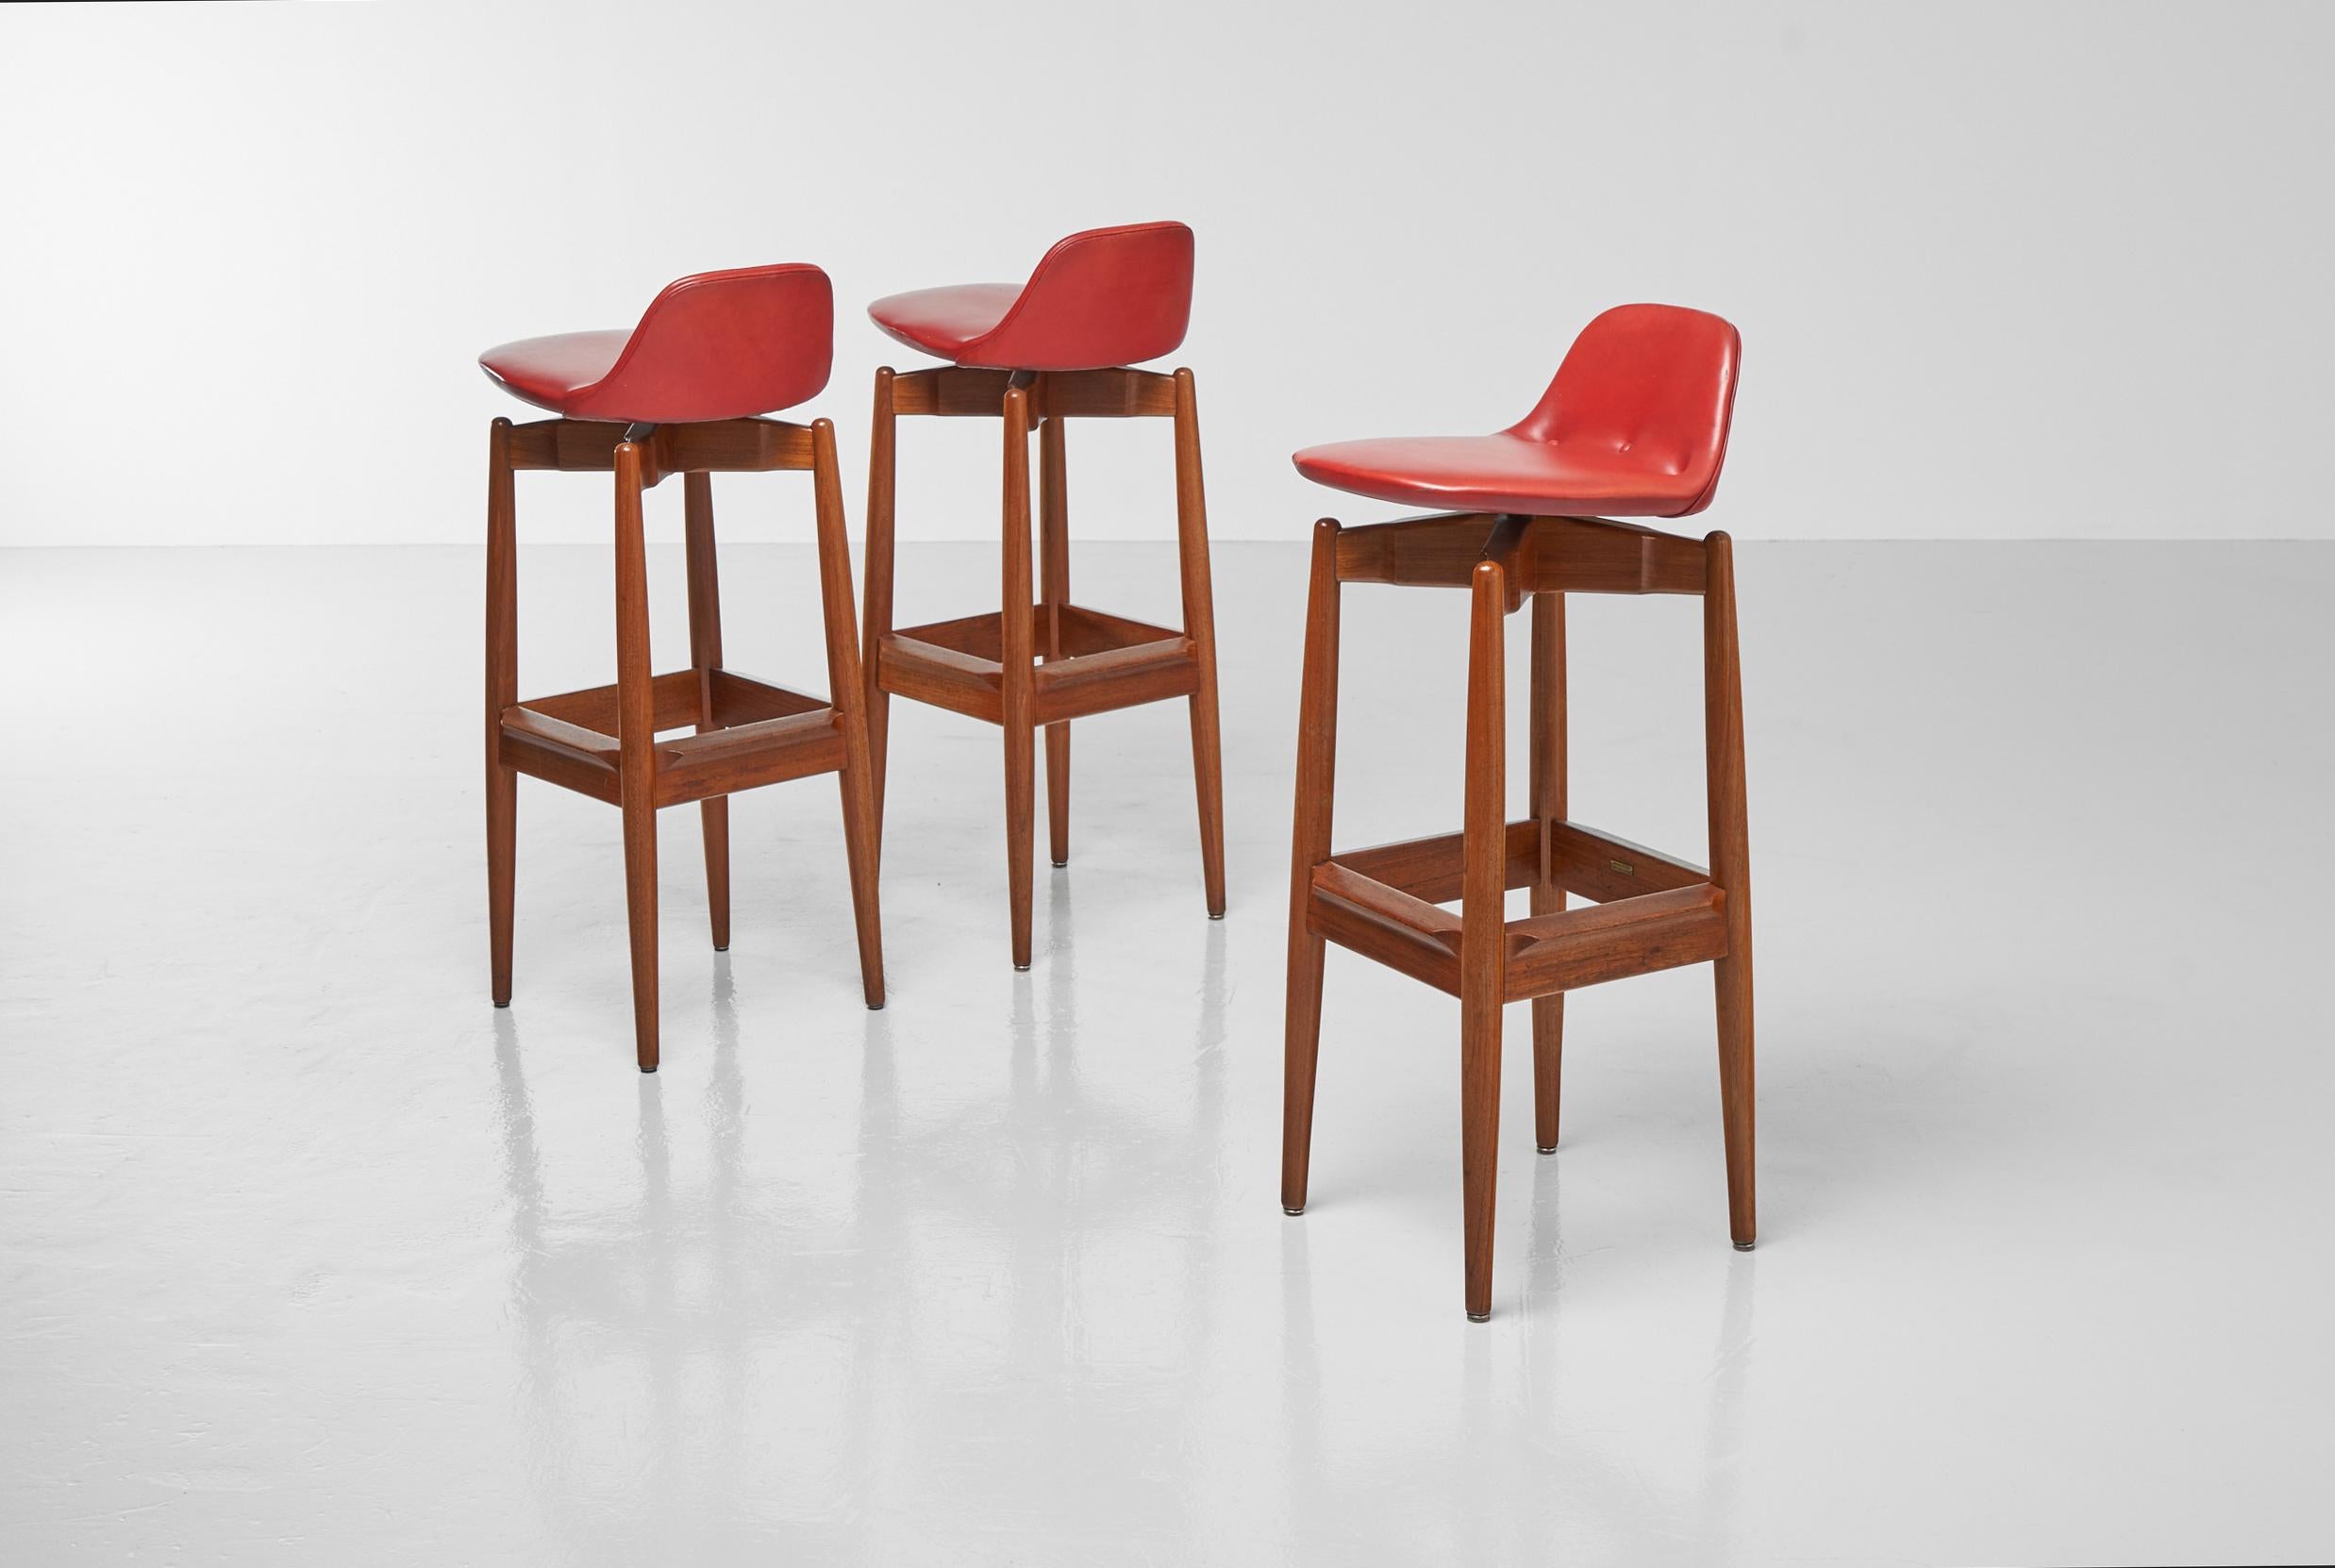 Stunning set of 3 'model 64' stools designed by Arne Vodder and manufactured by Sibast Mobler, Denmark 1960. This rare set of stools has a nice shaped frame made of solid teak wood. It has very nice rounded shapes, very typical for the Danish way of